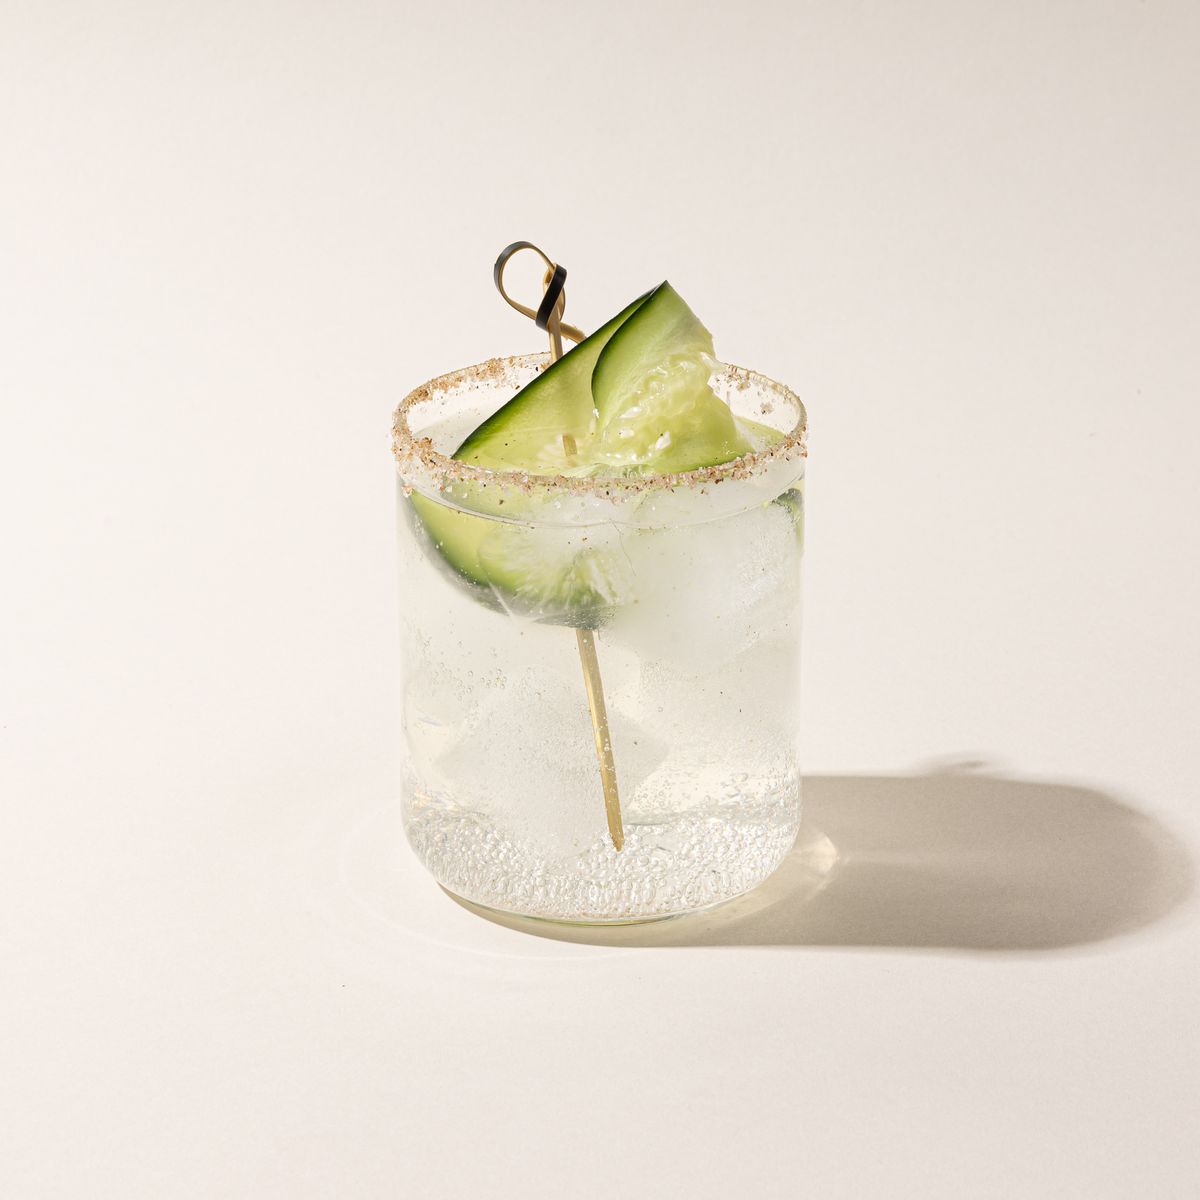 A straight walled short glass cup with a clear cocktail and cucumber garnish.